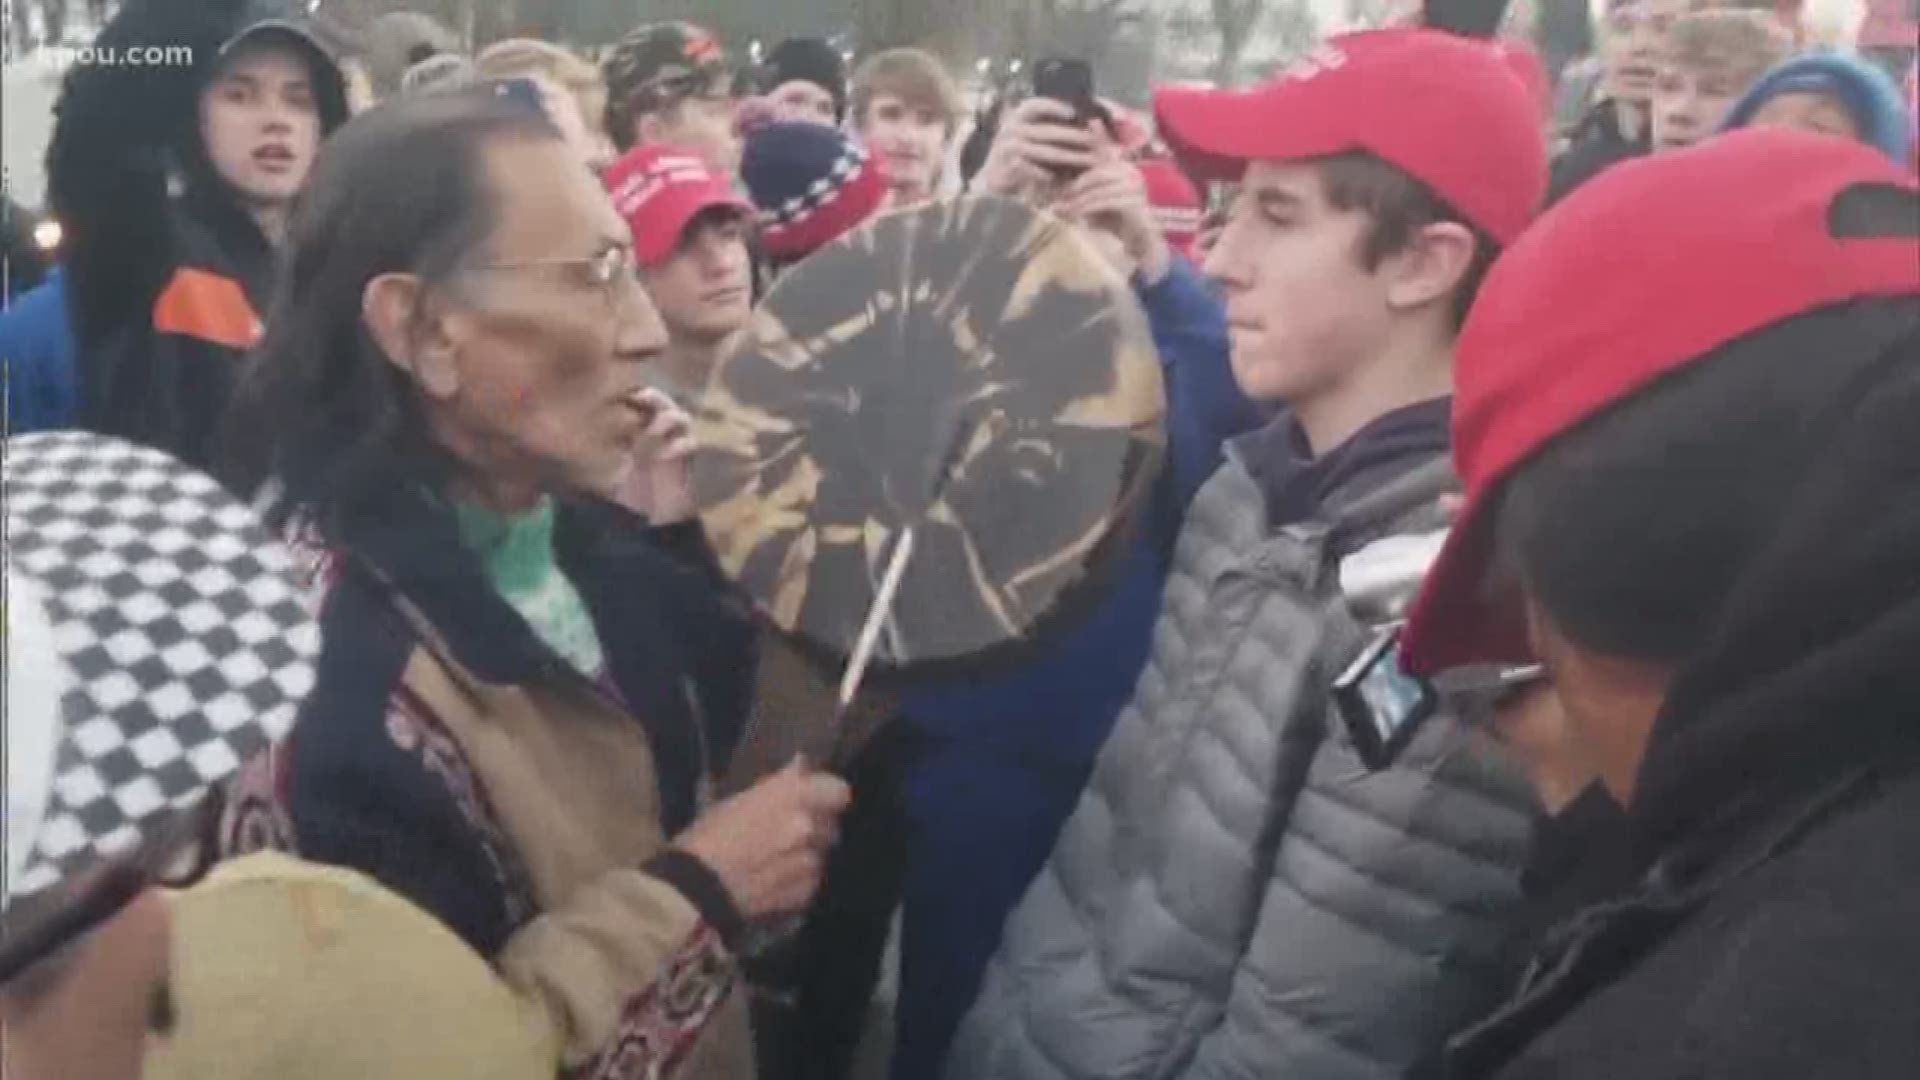 A Native American organizer of a march in Washington, D.C., says he felt compelled to get between a group of black activists and largely white students with his ceremonial drum to defuse a potentially dangerous situation. Now, one of those students is telling his side of the story.